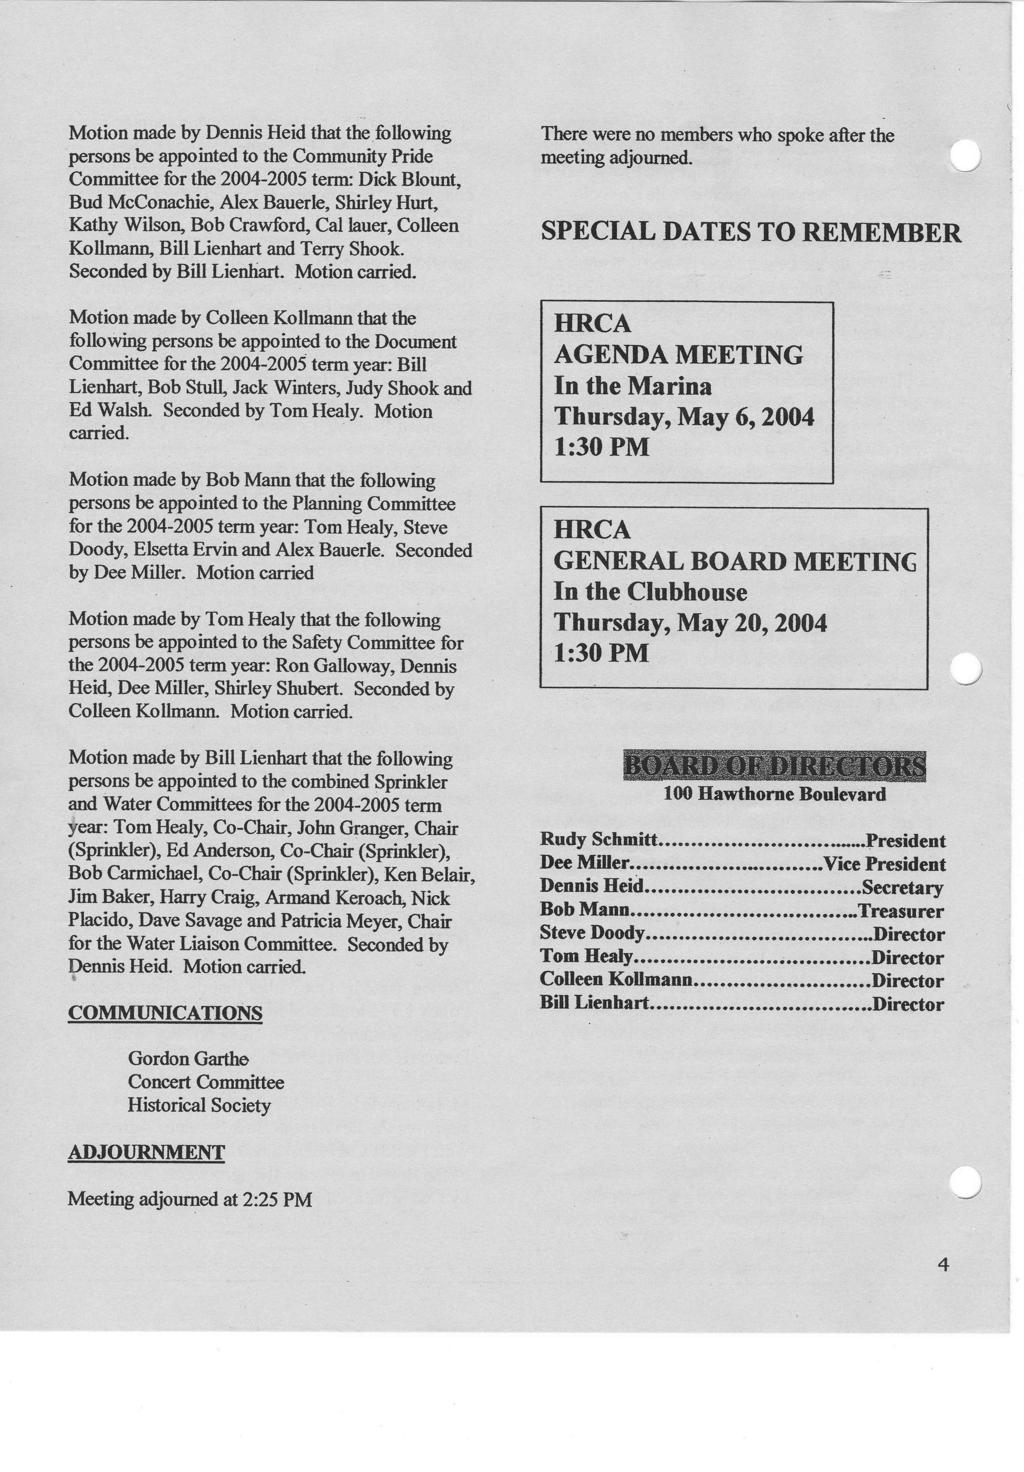 Motion made by Dennis Heid that thefollowing persons be appointed to the Community Pride Committee for the 2004-2005 term: Dick Blount Bud McConachie Alex Bauerle Shirley Hurt Kathy Wilson Bob